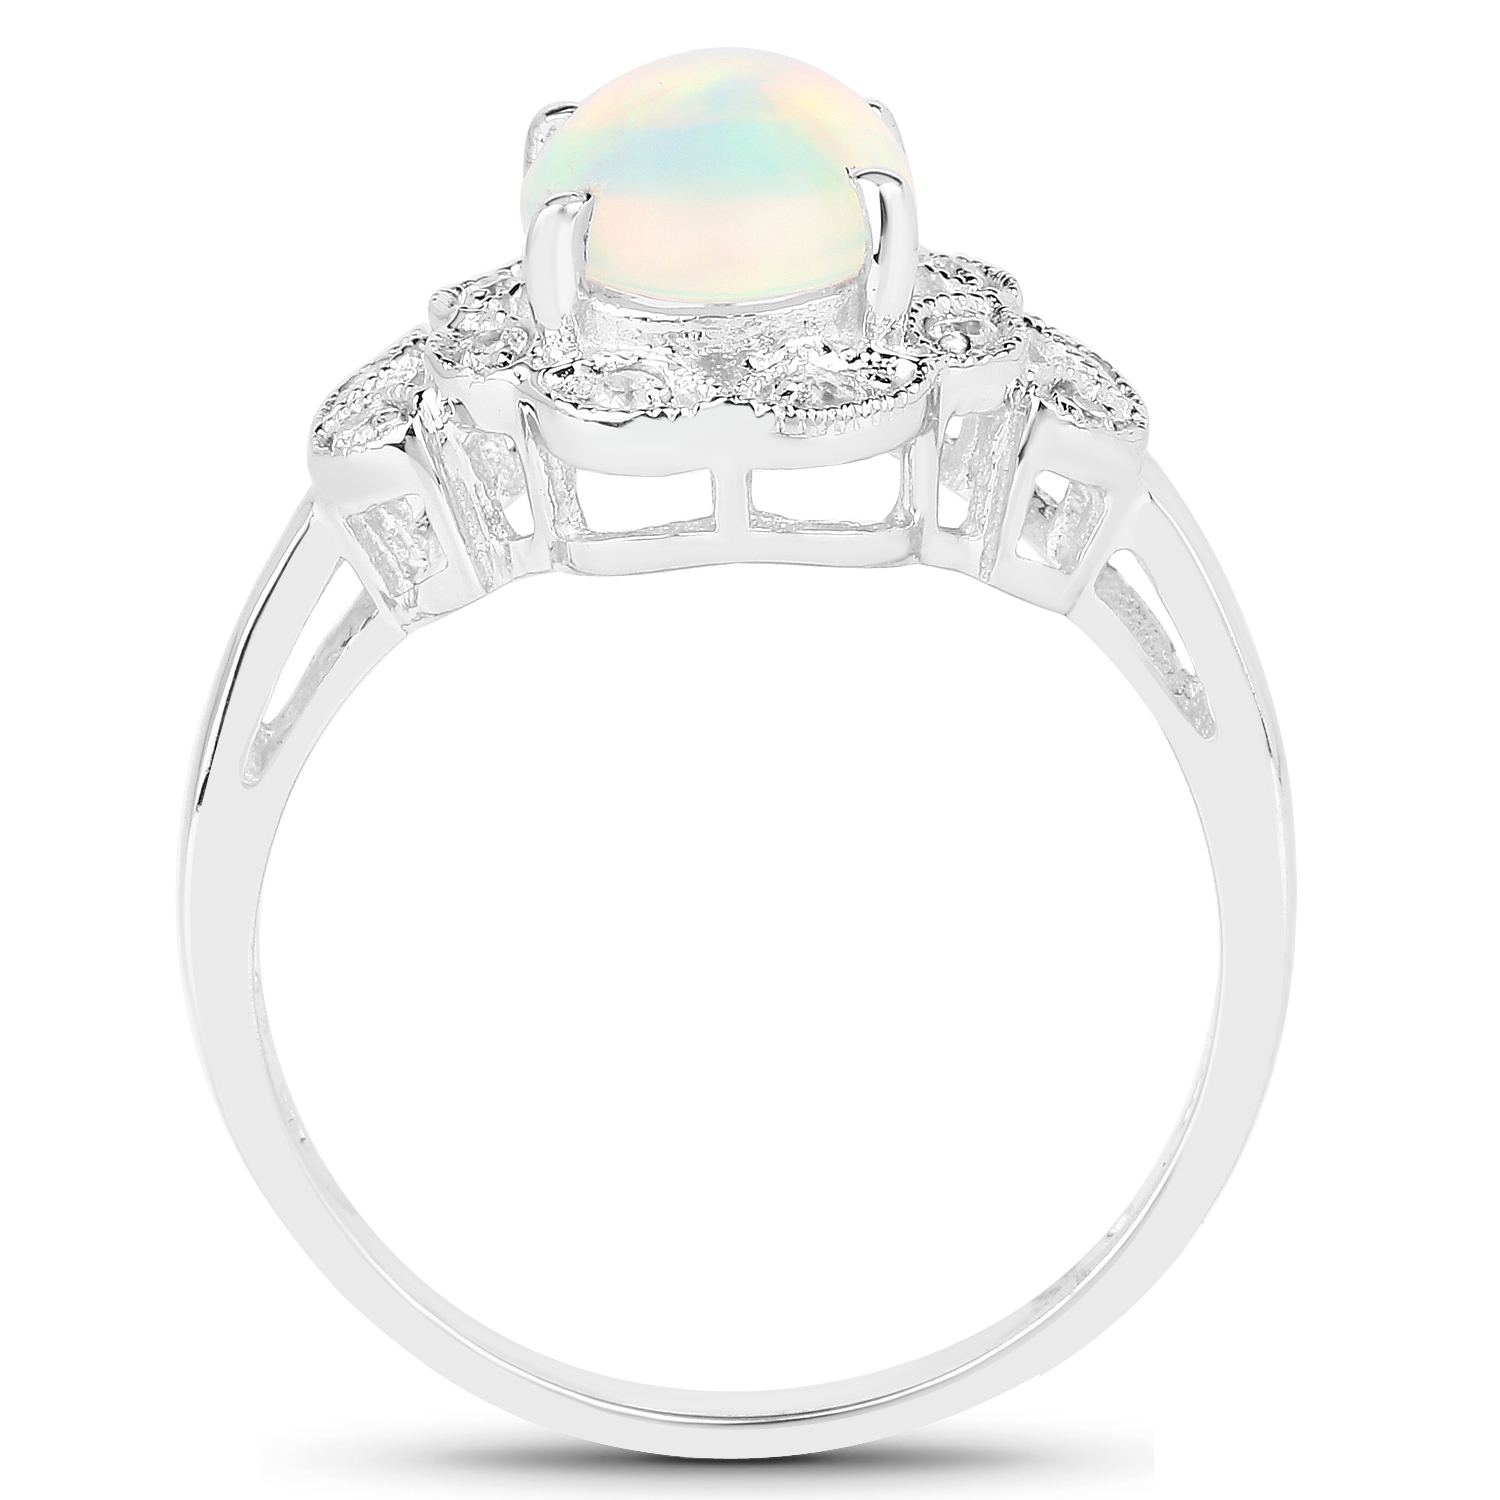 1.95 Ct Genuine Ethiopian Opal & White Cubic Zirconia 925 Sterling Silver Ring